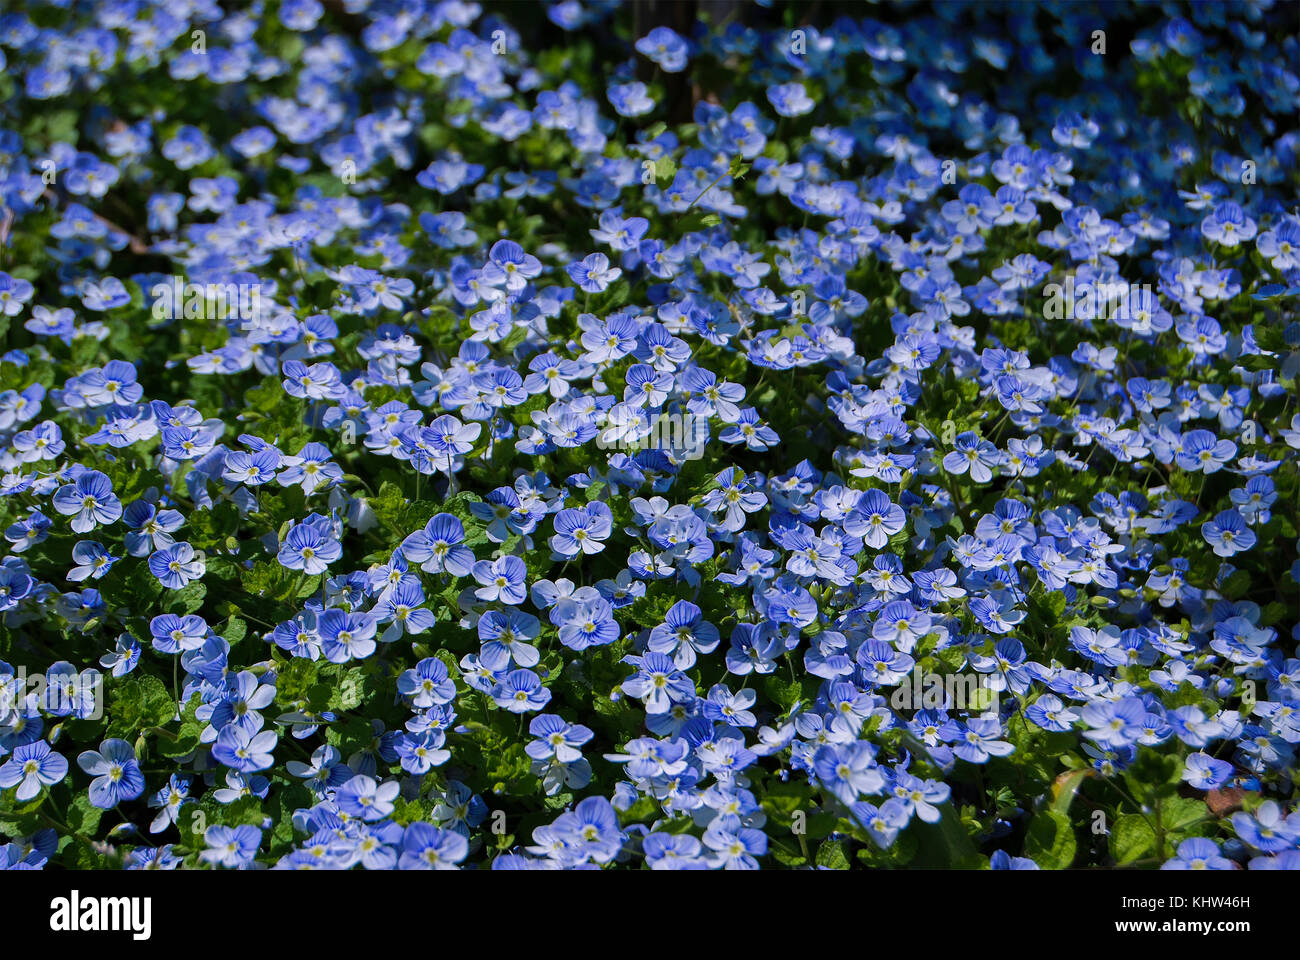 A large field of blue forget-me-nots with green leaves Stock Photo